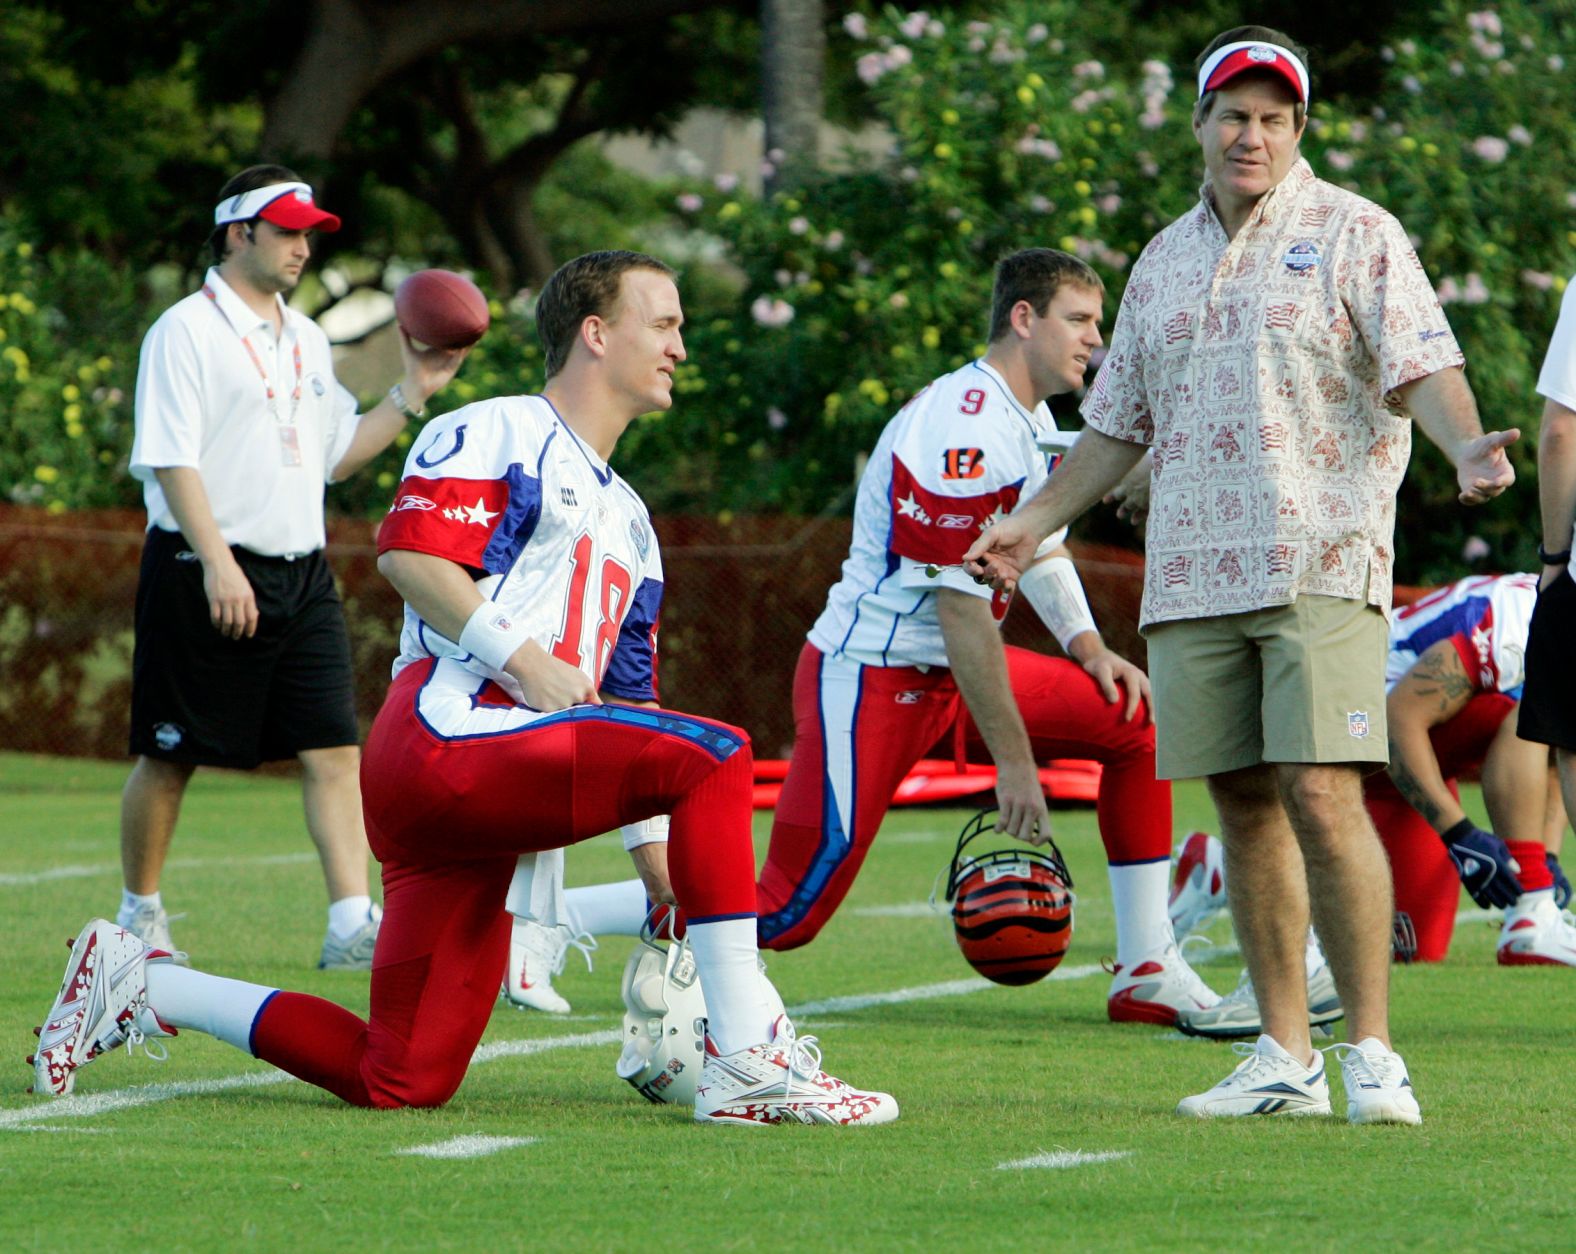 Belichick talks with Indianapolis Colts quarterback Peyton Manning during a Pro Bowl practice in Hawaii in 2007.